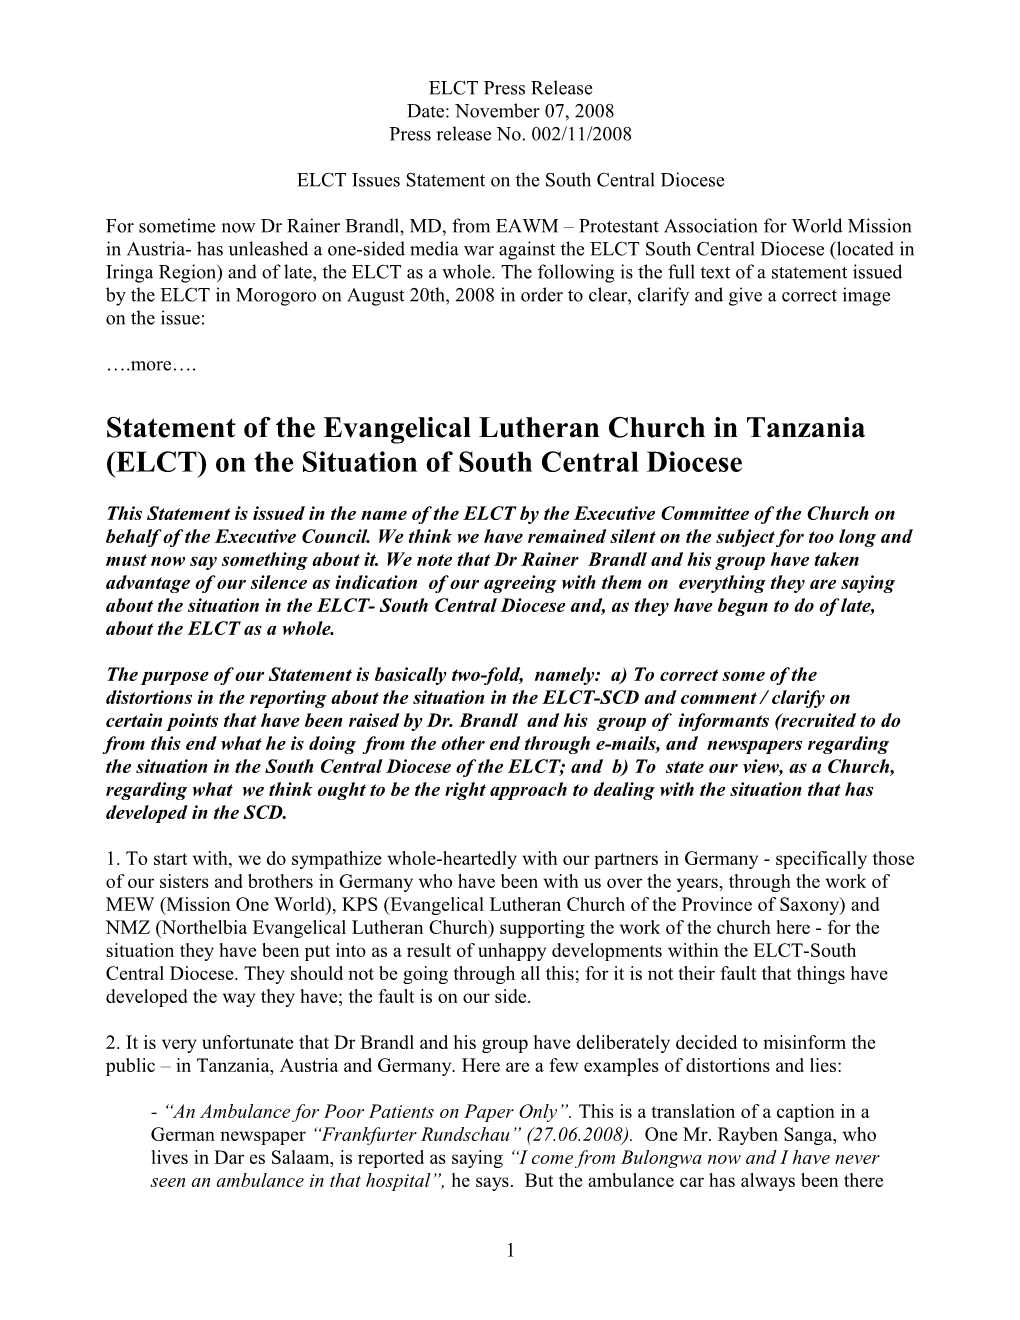 Statement of the Evangelical Lutheran Church in Tanzania (ELCT) on the Situation of South